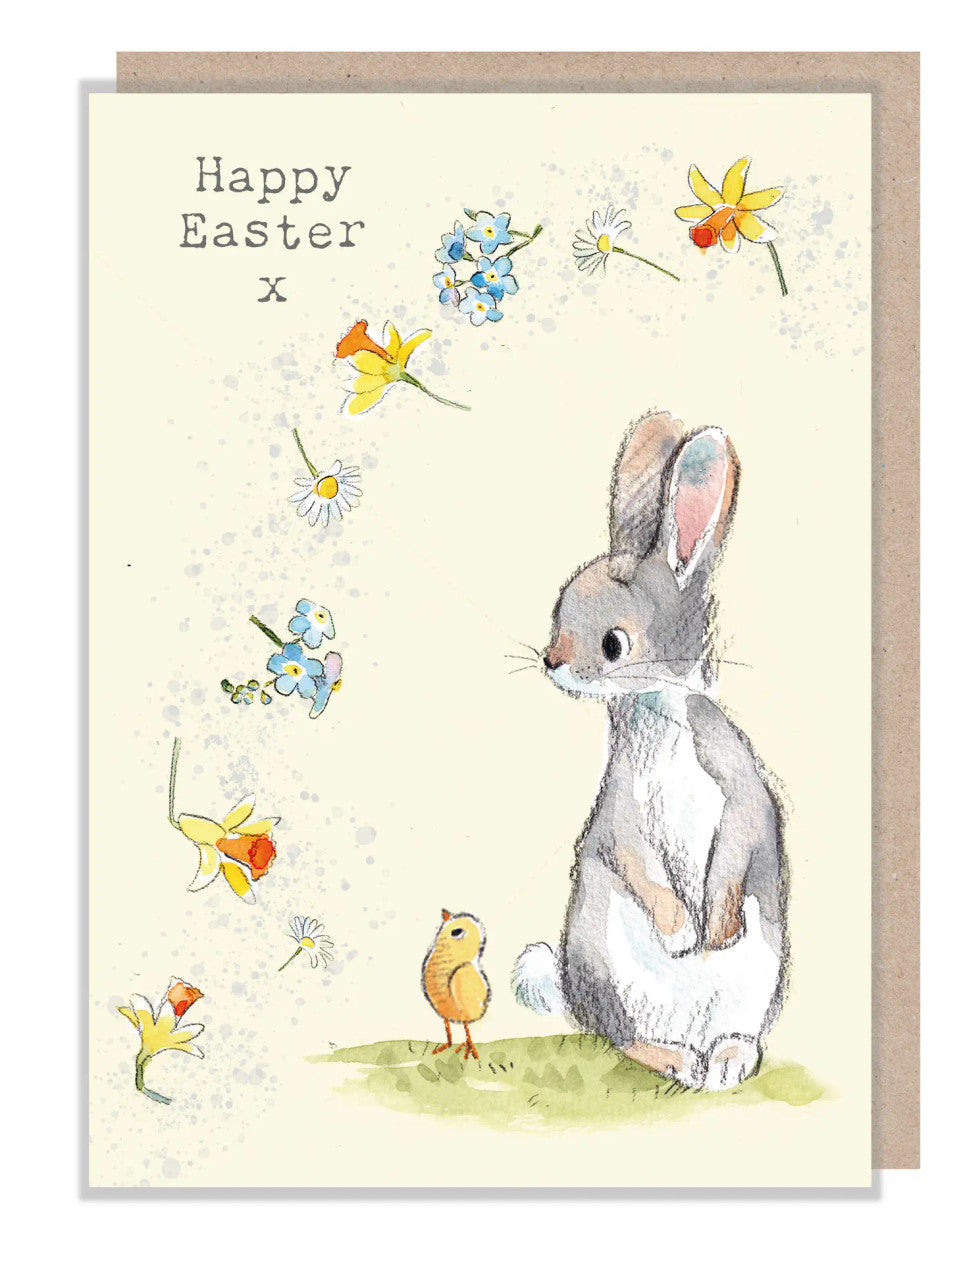 Rabbit with Chick & Spring Flowers Happy Easter Greetings Card by Paper Shed Design